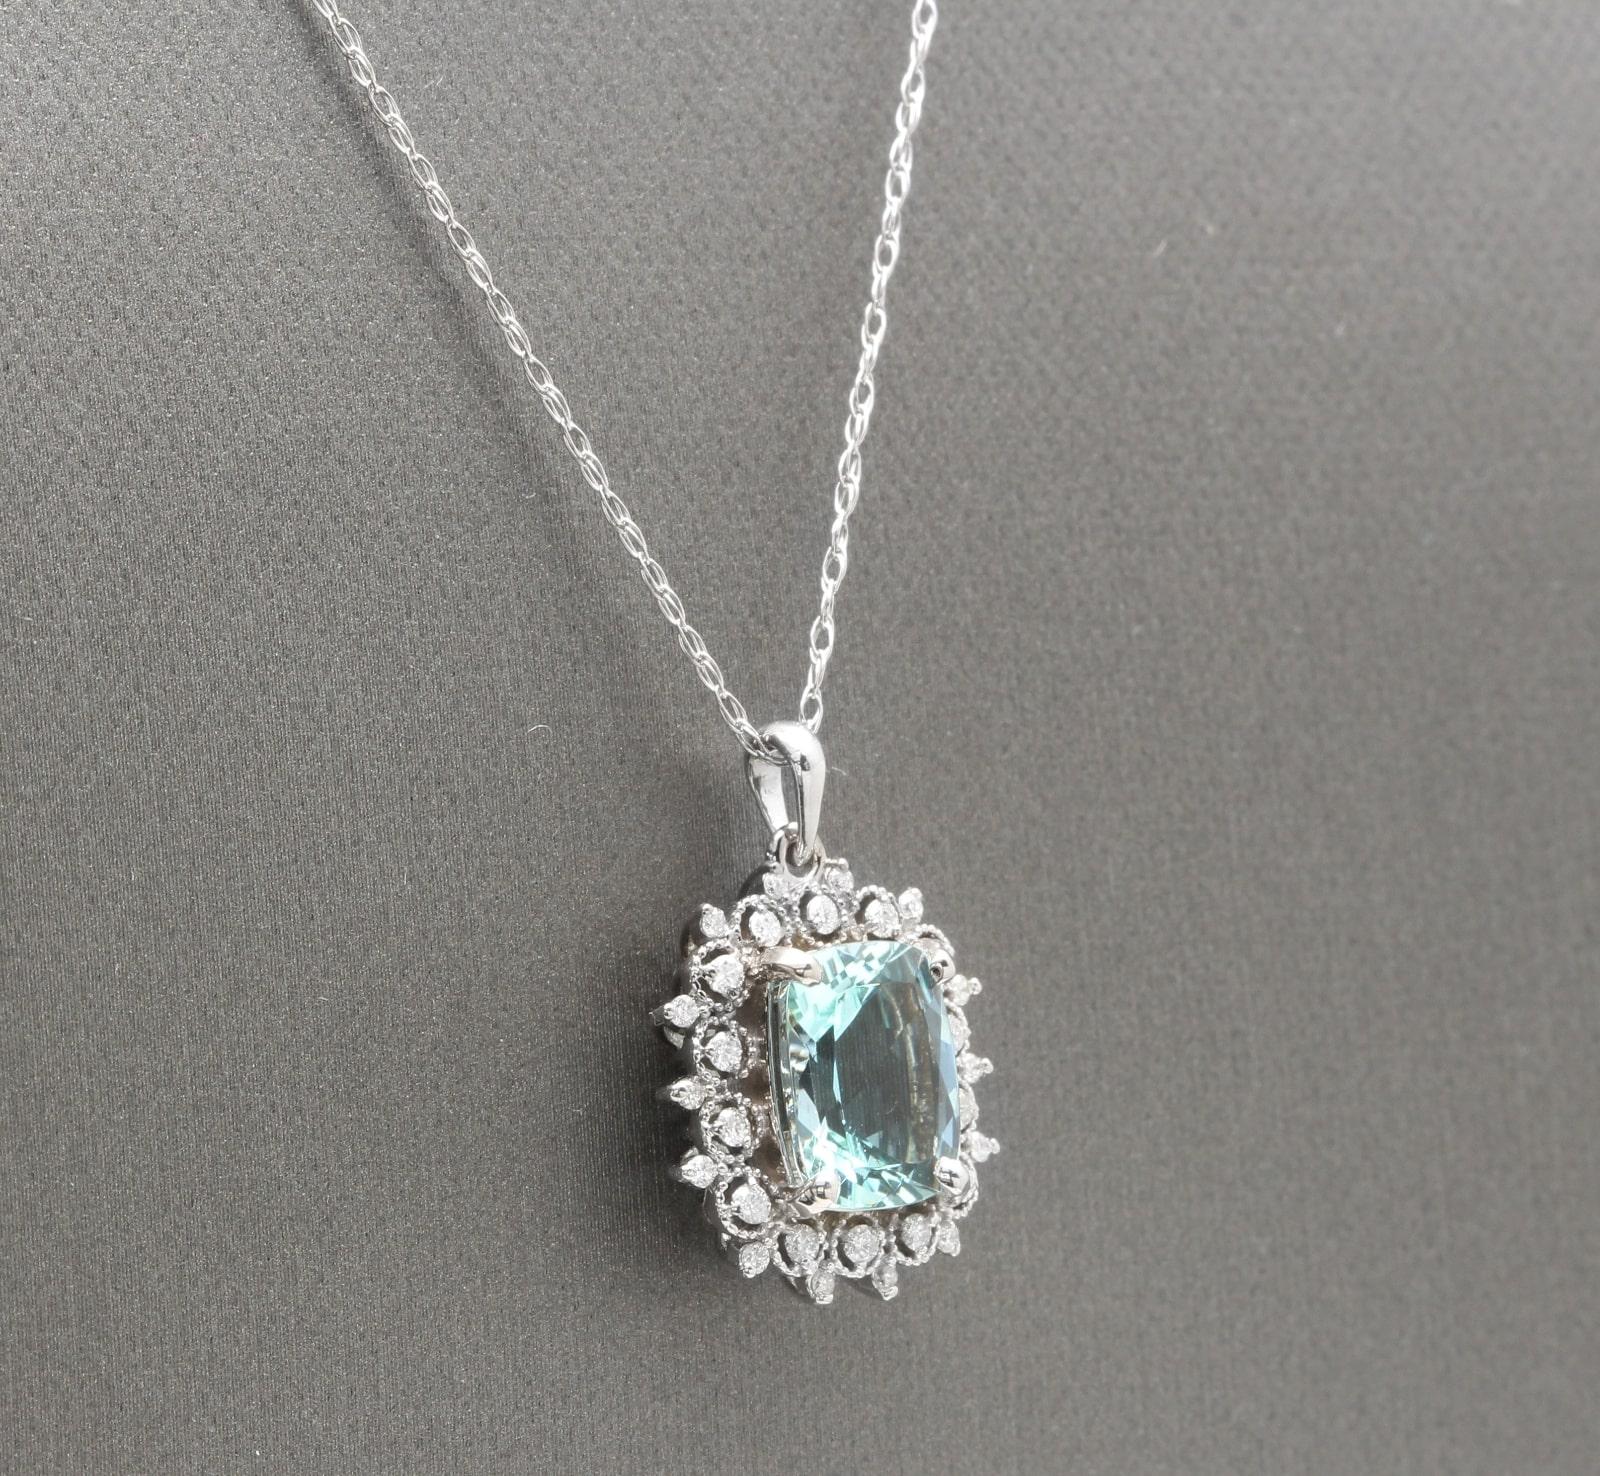 3.40Ct Natural Aquamarine and Diamond 14K Solid White Gold Necklace

Stamped: 14K

Suggested Replacement Value: $5,000.00 

Natural Oval Cut Aquamarine Weights: Approx. 3.00 Carats

Aquamarine Measures: Approx. 10.00 x 8.00mm

Total Natural Round